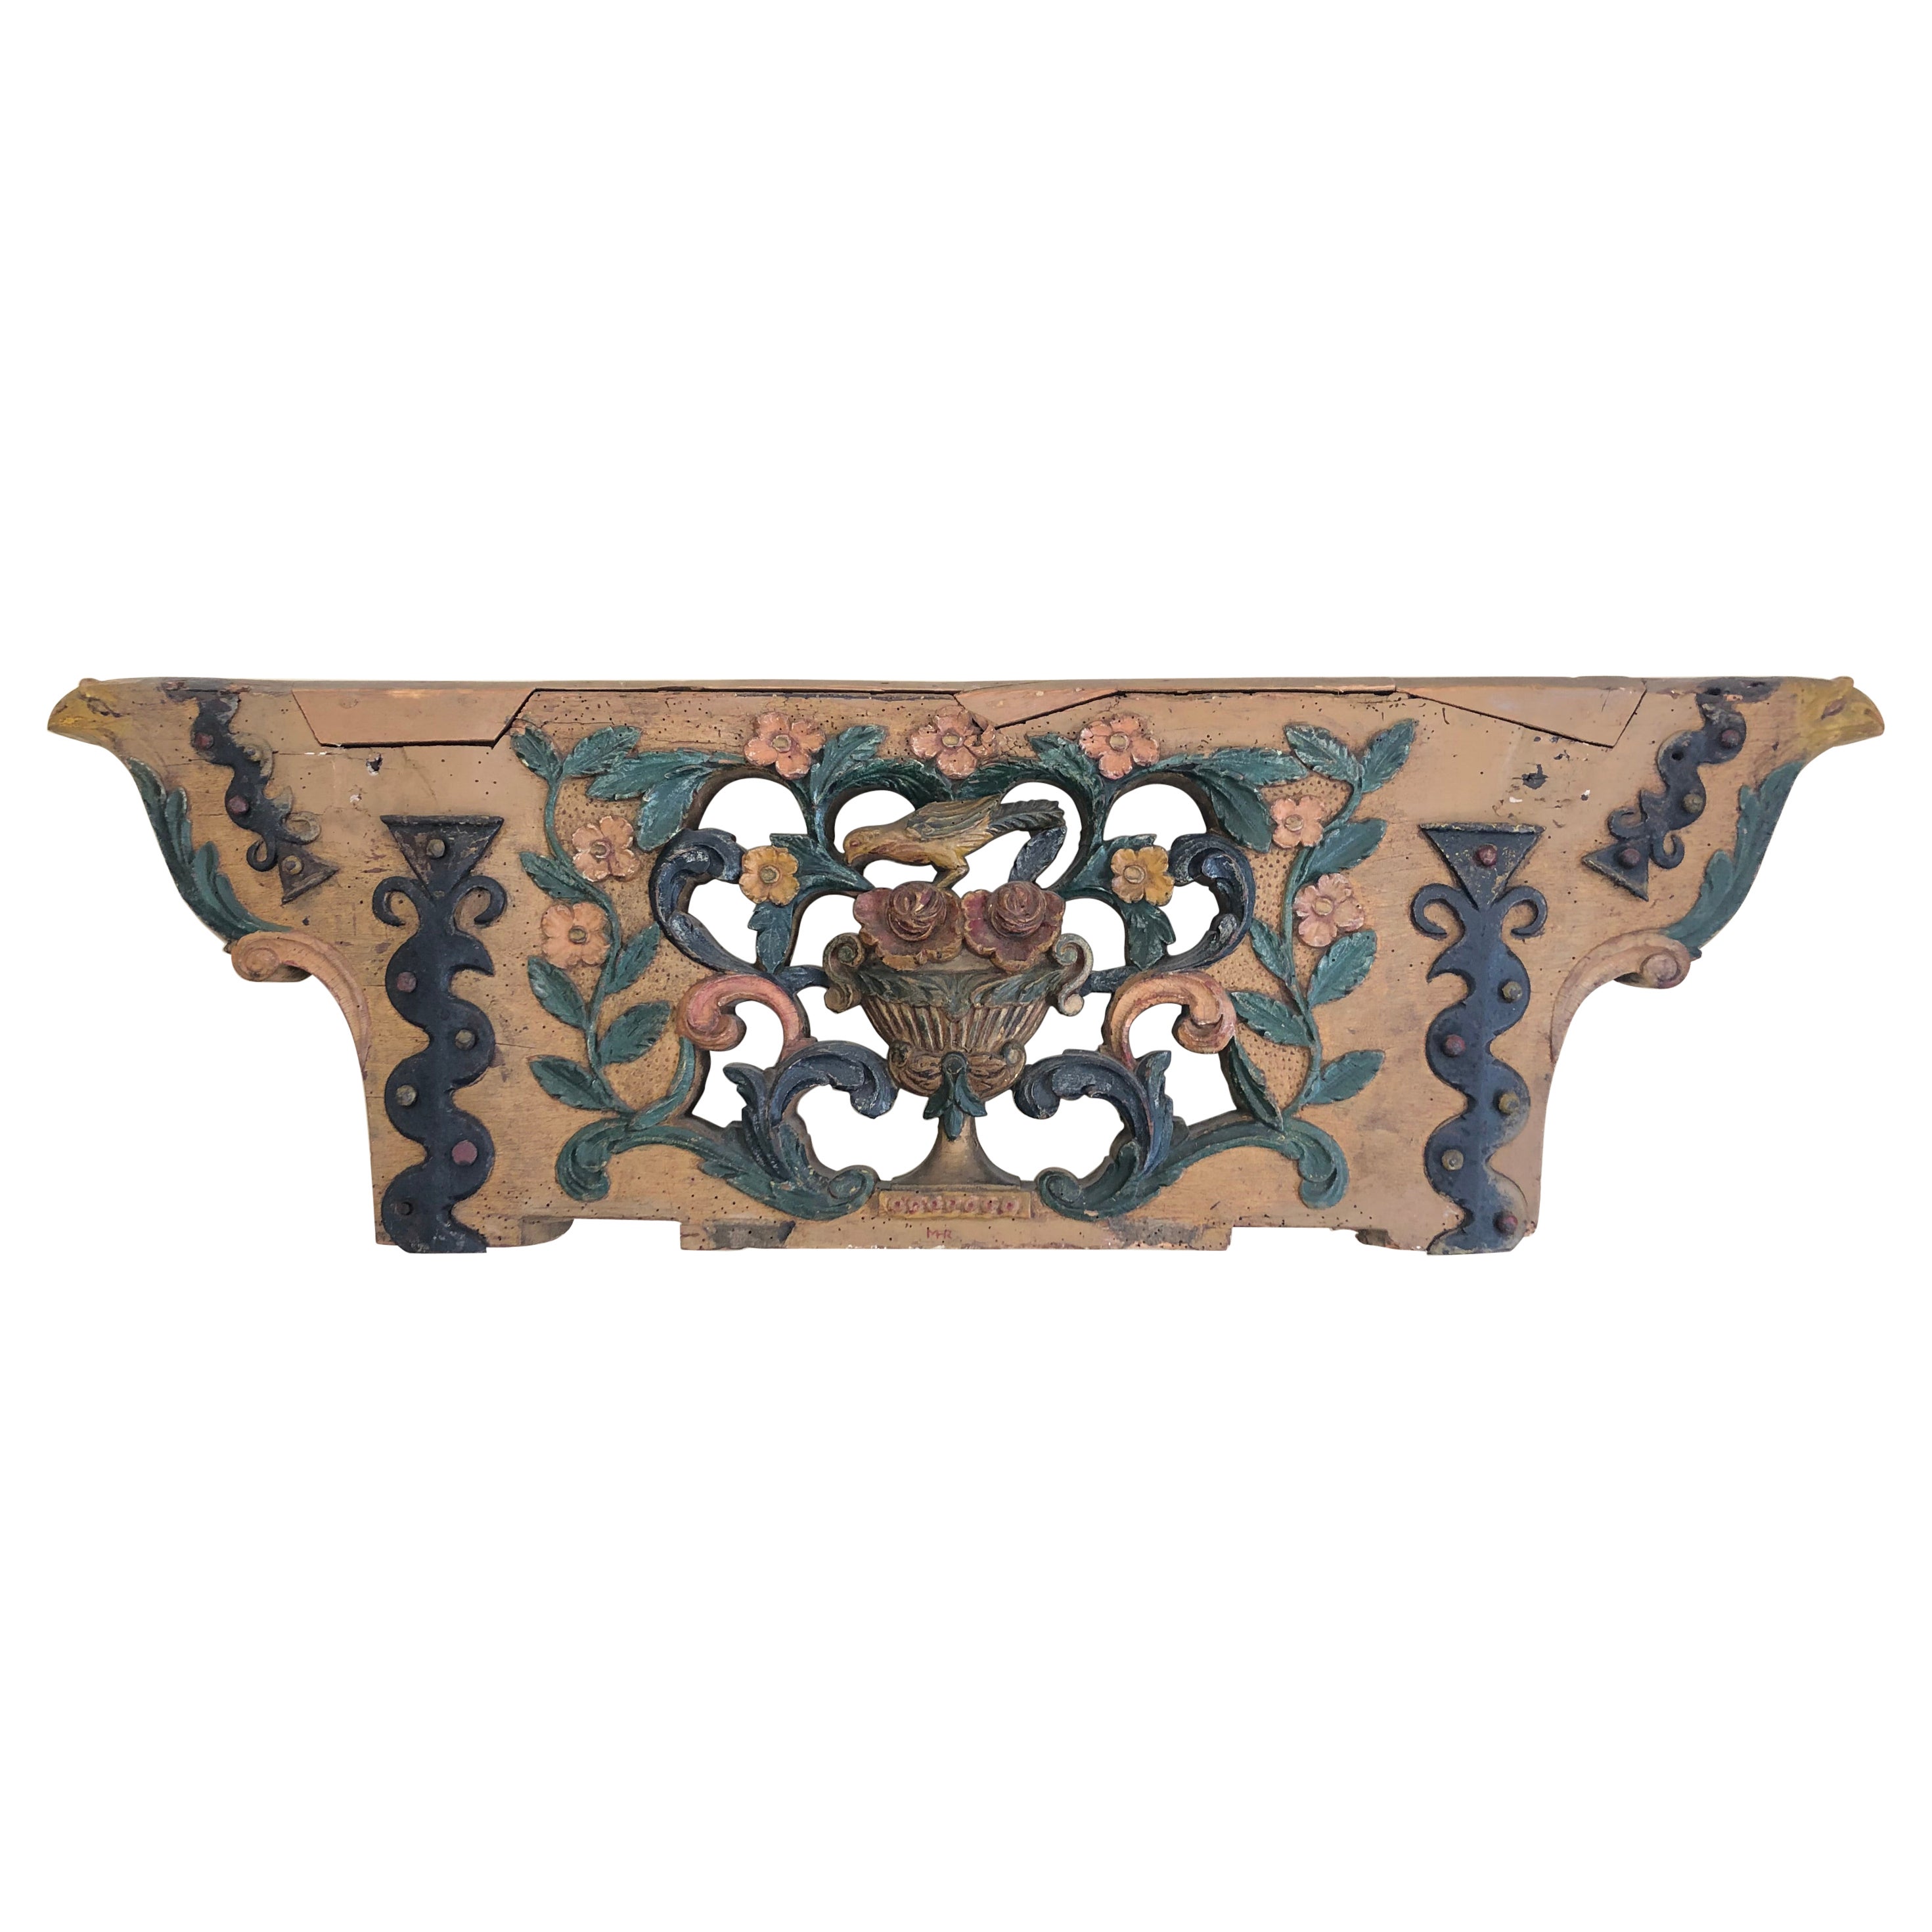 One of a Kind Whimsical Architectural Fragment with Flowers & Bird